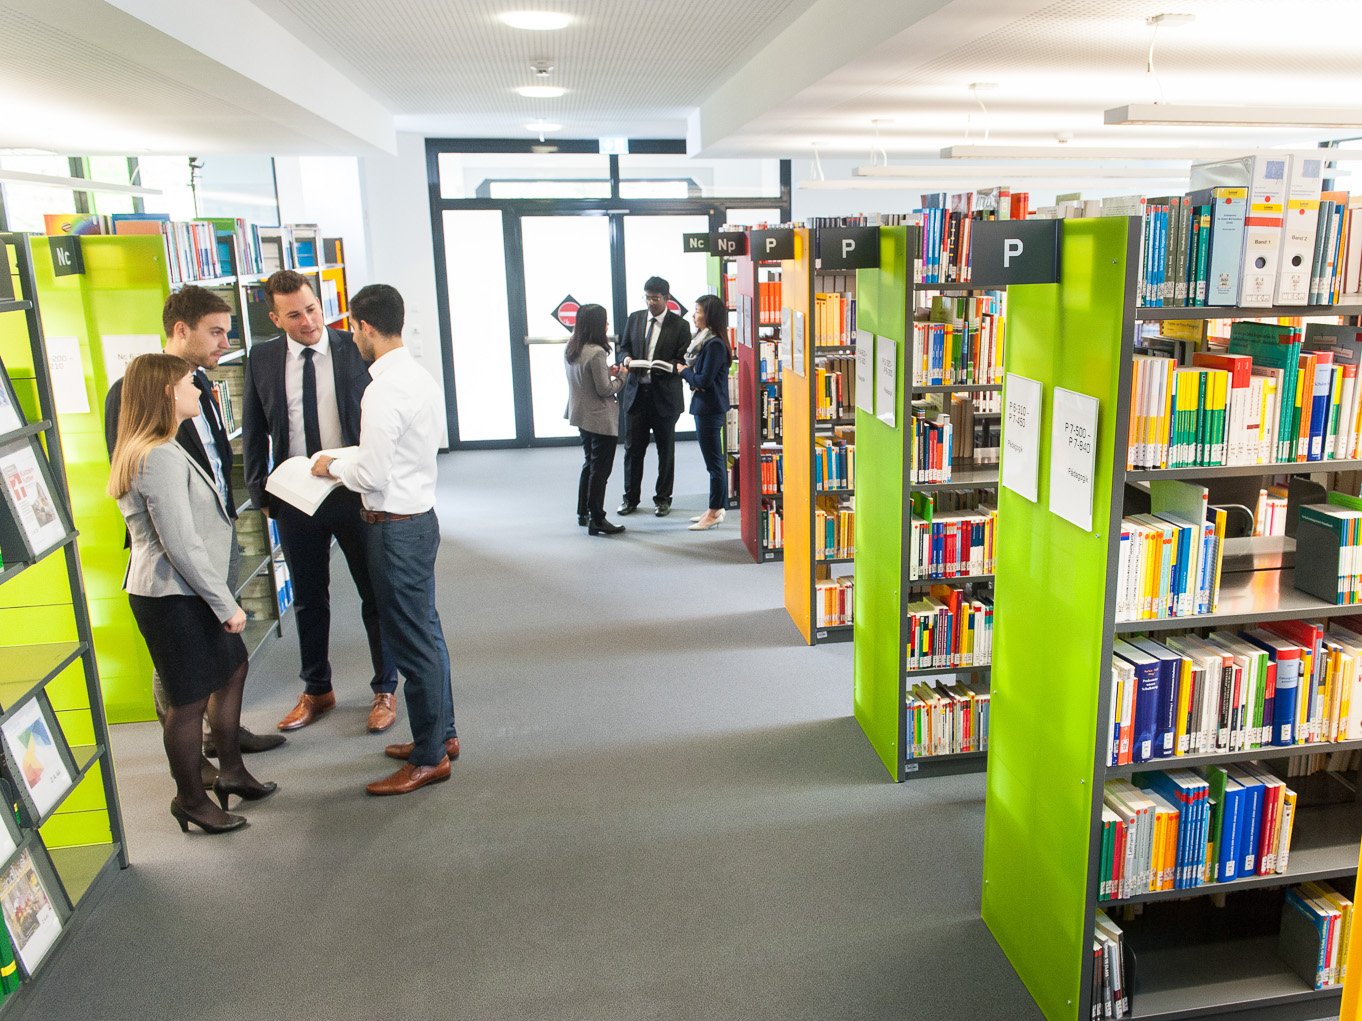 Global Management and Digital Competencies ESB Business School students interacting with each other in the library.